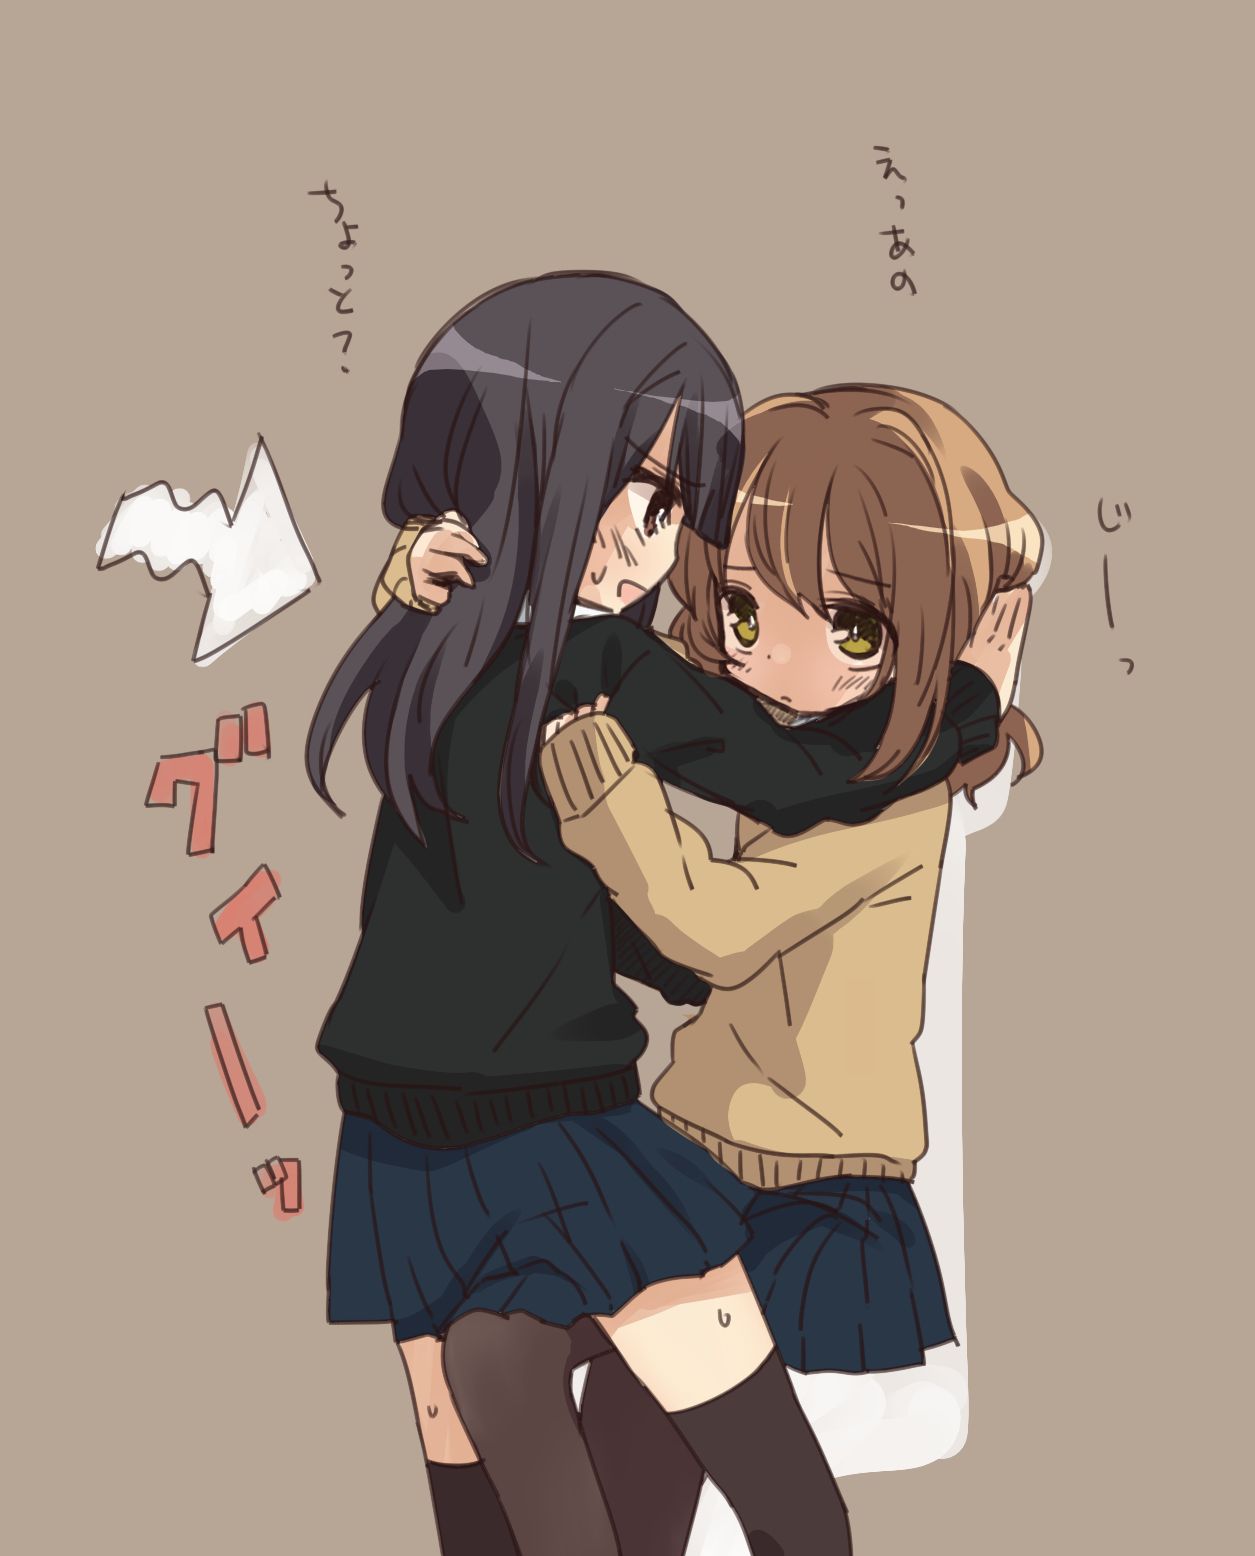 [Secondary-ZIP: Yuri lesbian image, or see other girls doing naughty things. 11